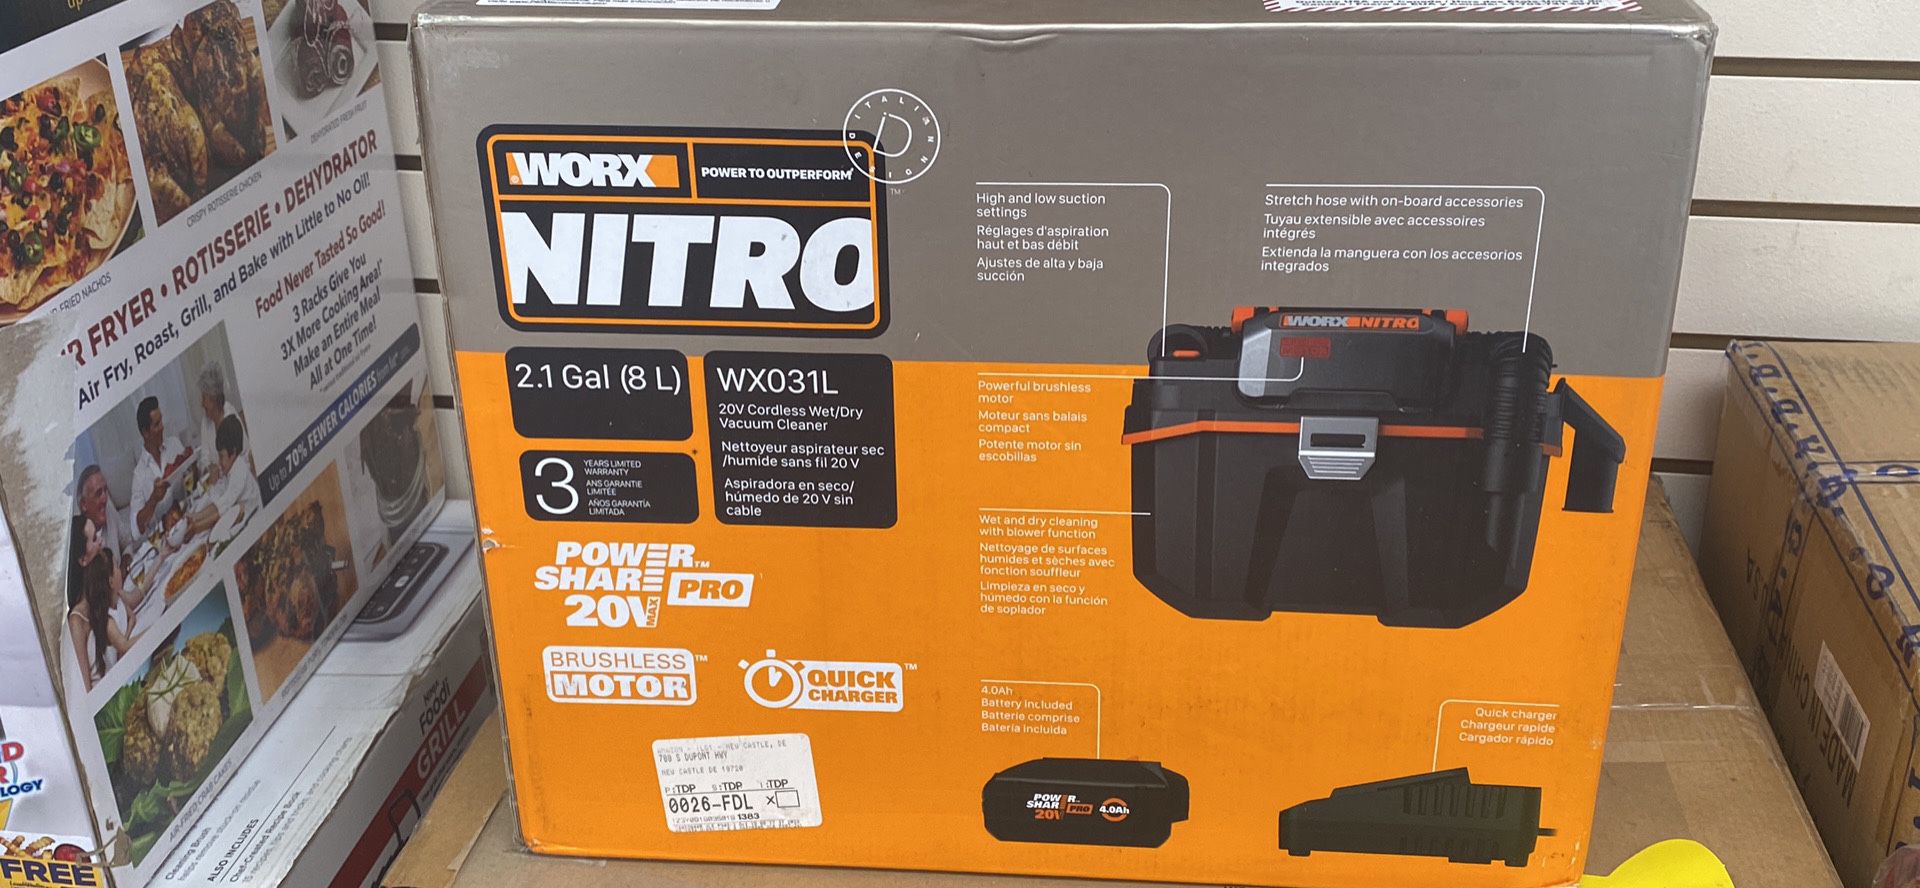 WORX Nitro WX031L 20V 2.1 Gal Cordless Wet/Dry Vacuum, Black for Sale in  North Plainfield, NJ OfferUp